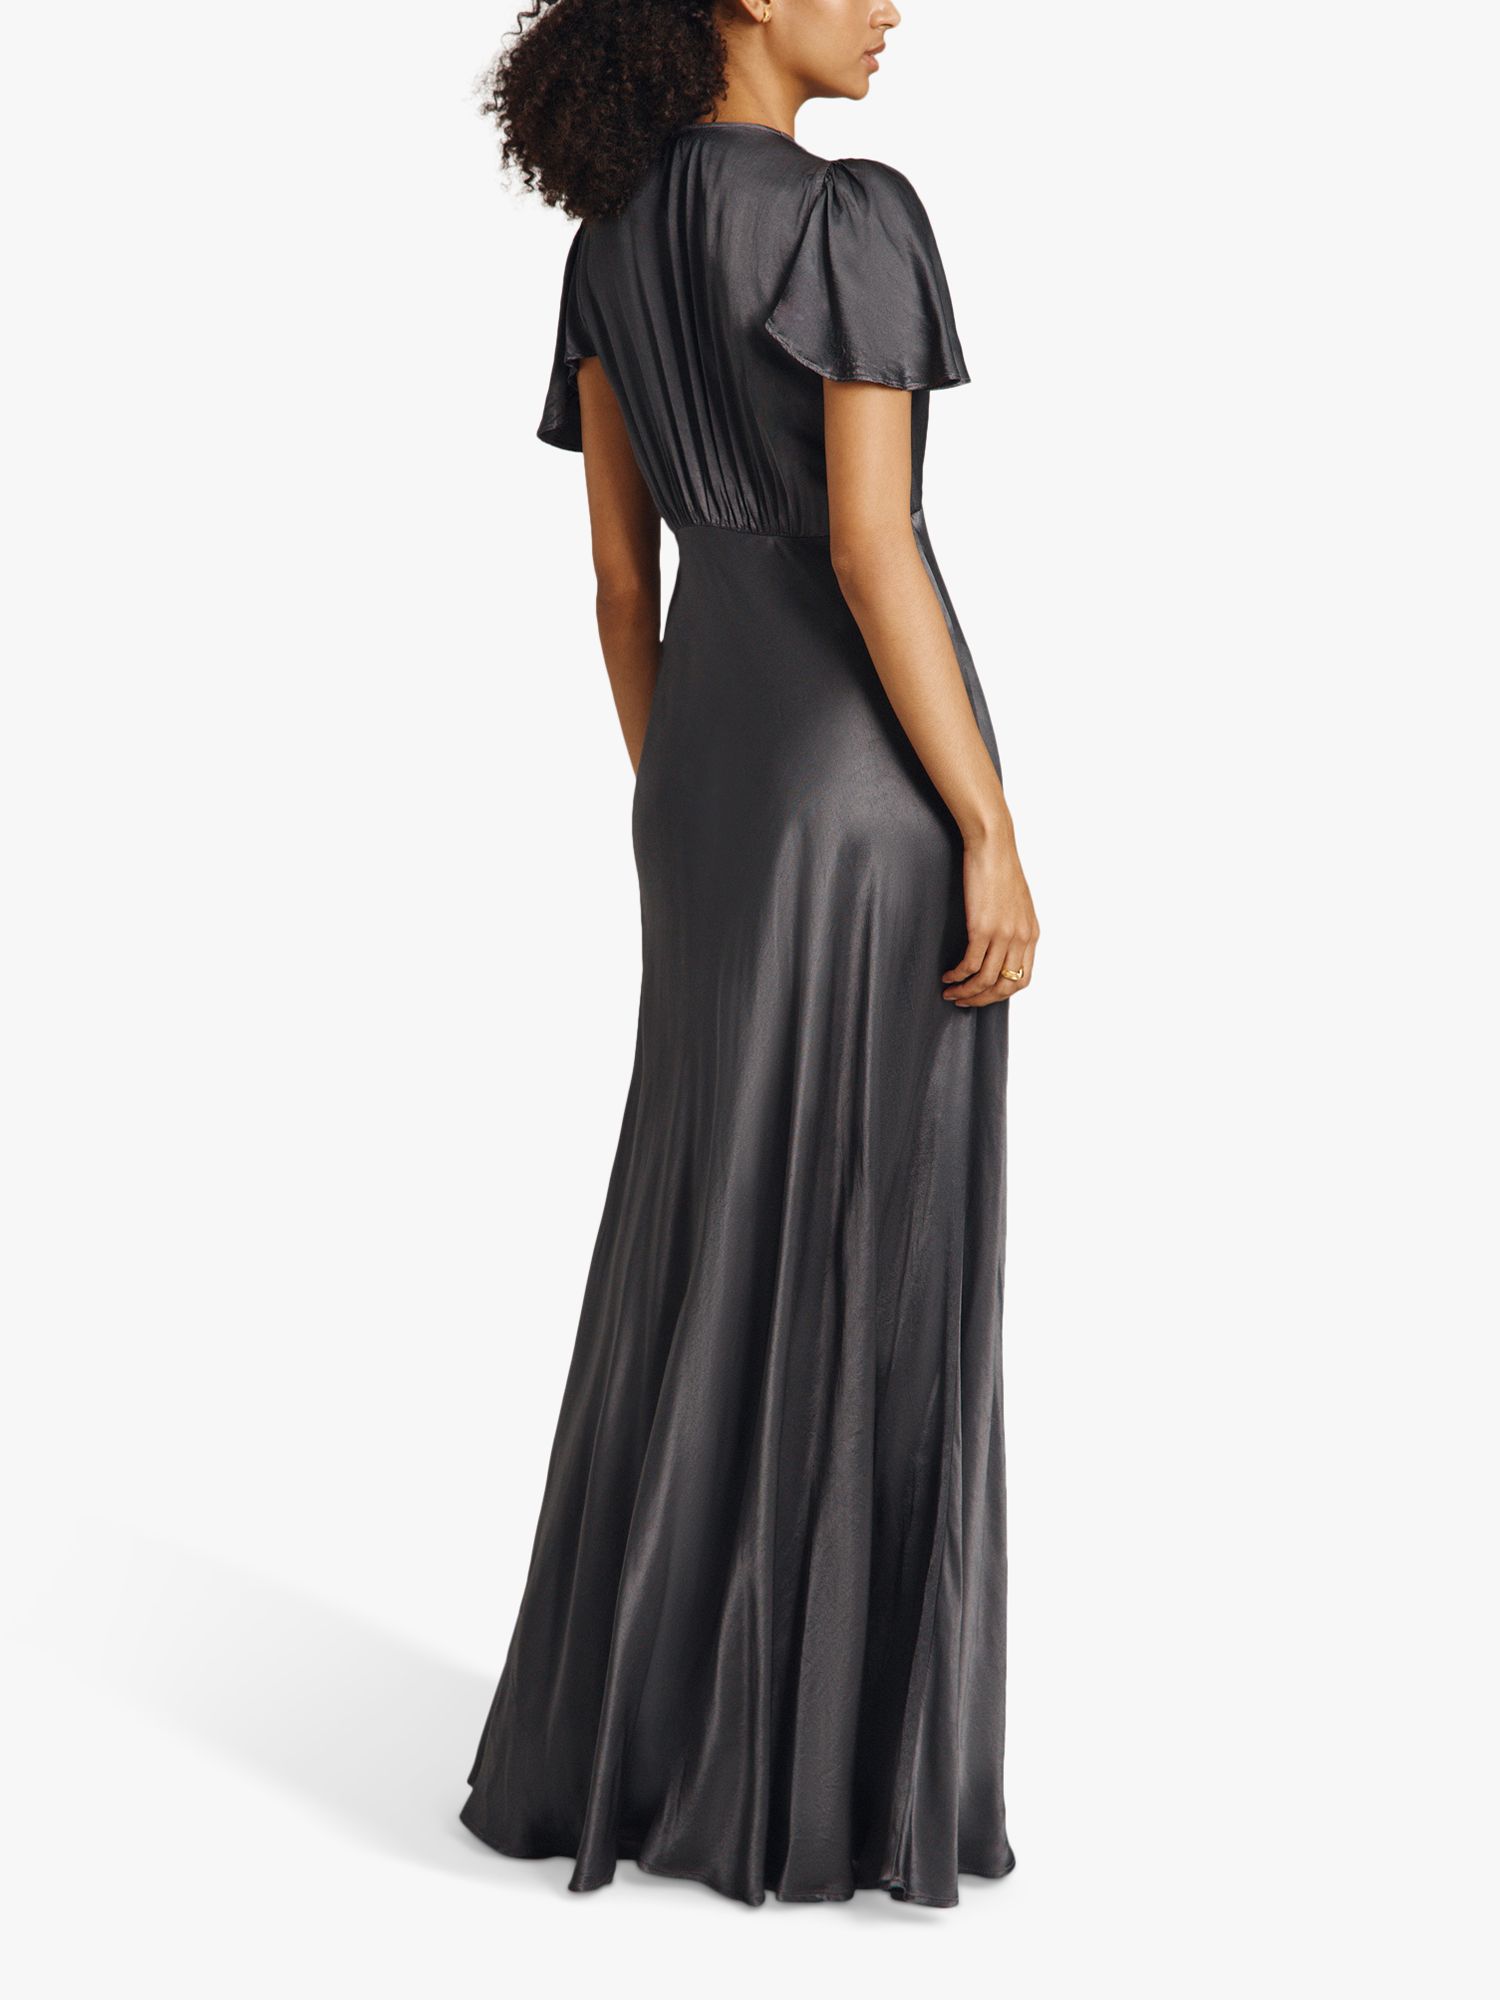 Ghost Delphine Satin Maxi Dress, Charcoal at John Lewis & Partners